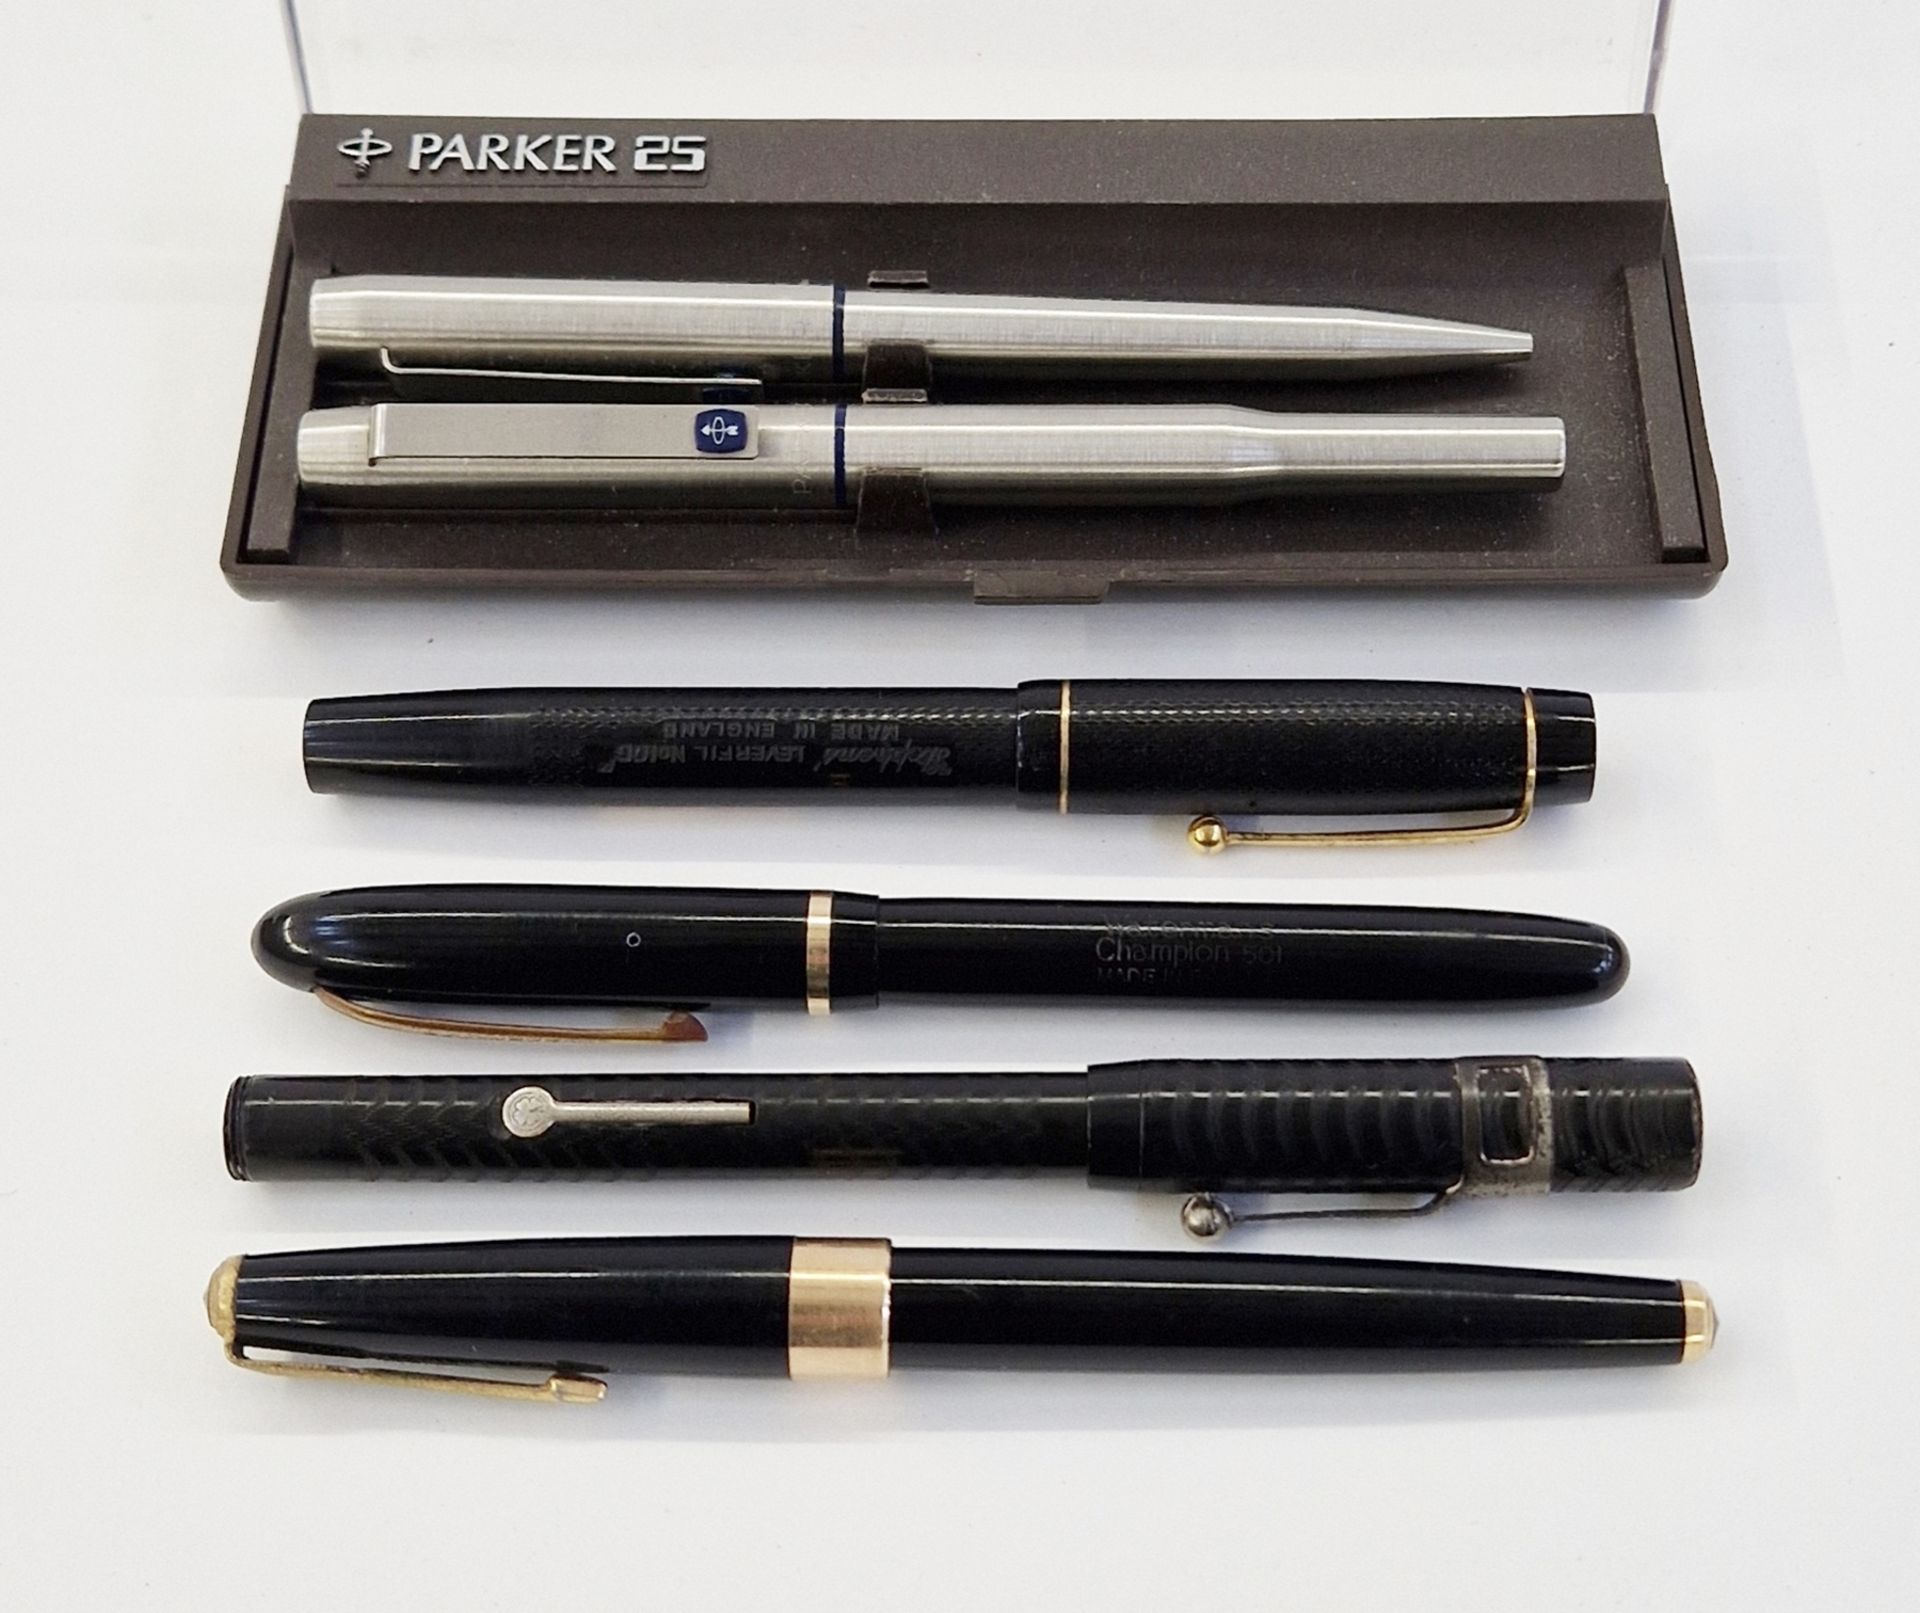 Waterman's Champion 501 fountain pen in black and gold, a Parker '17' fountain pen in black and